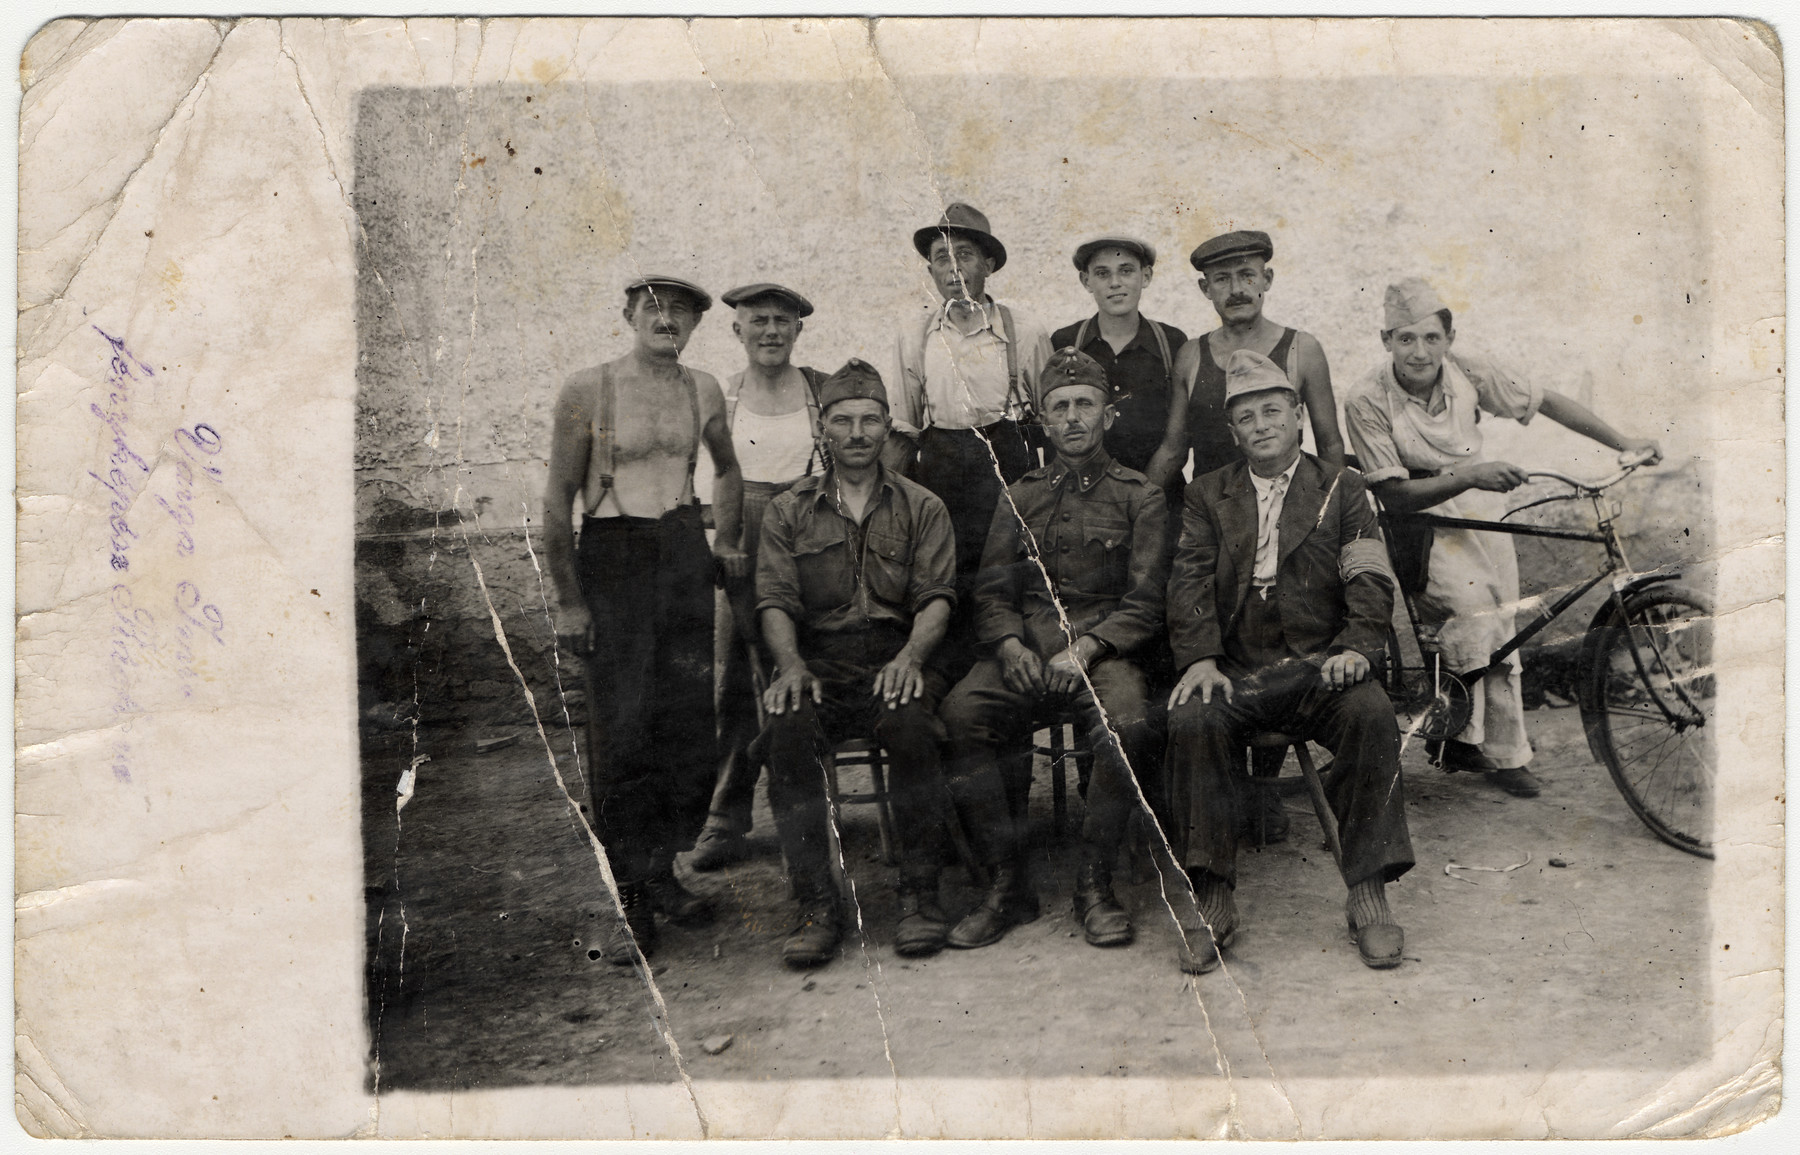 Group portrait of a Hungarian labor battalion.

Shimon Ganzl, uncle of the donor, is on the far left.